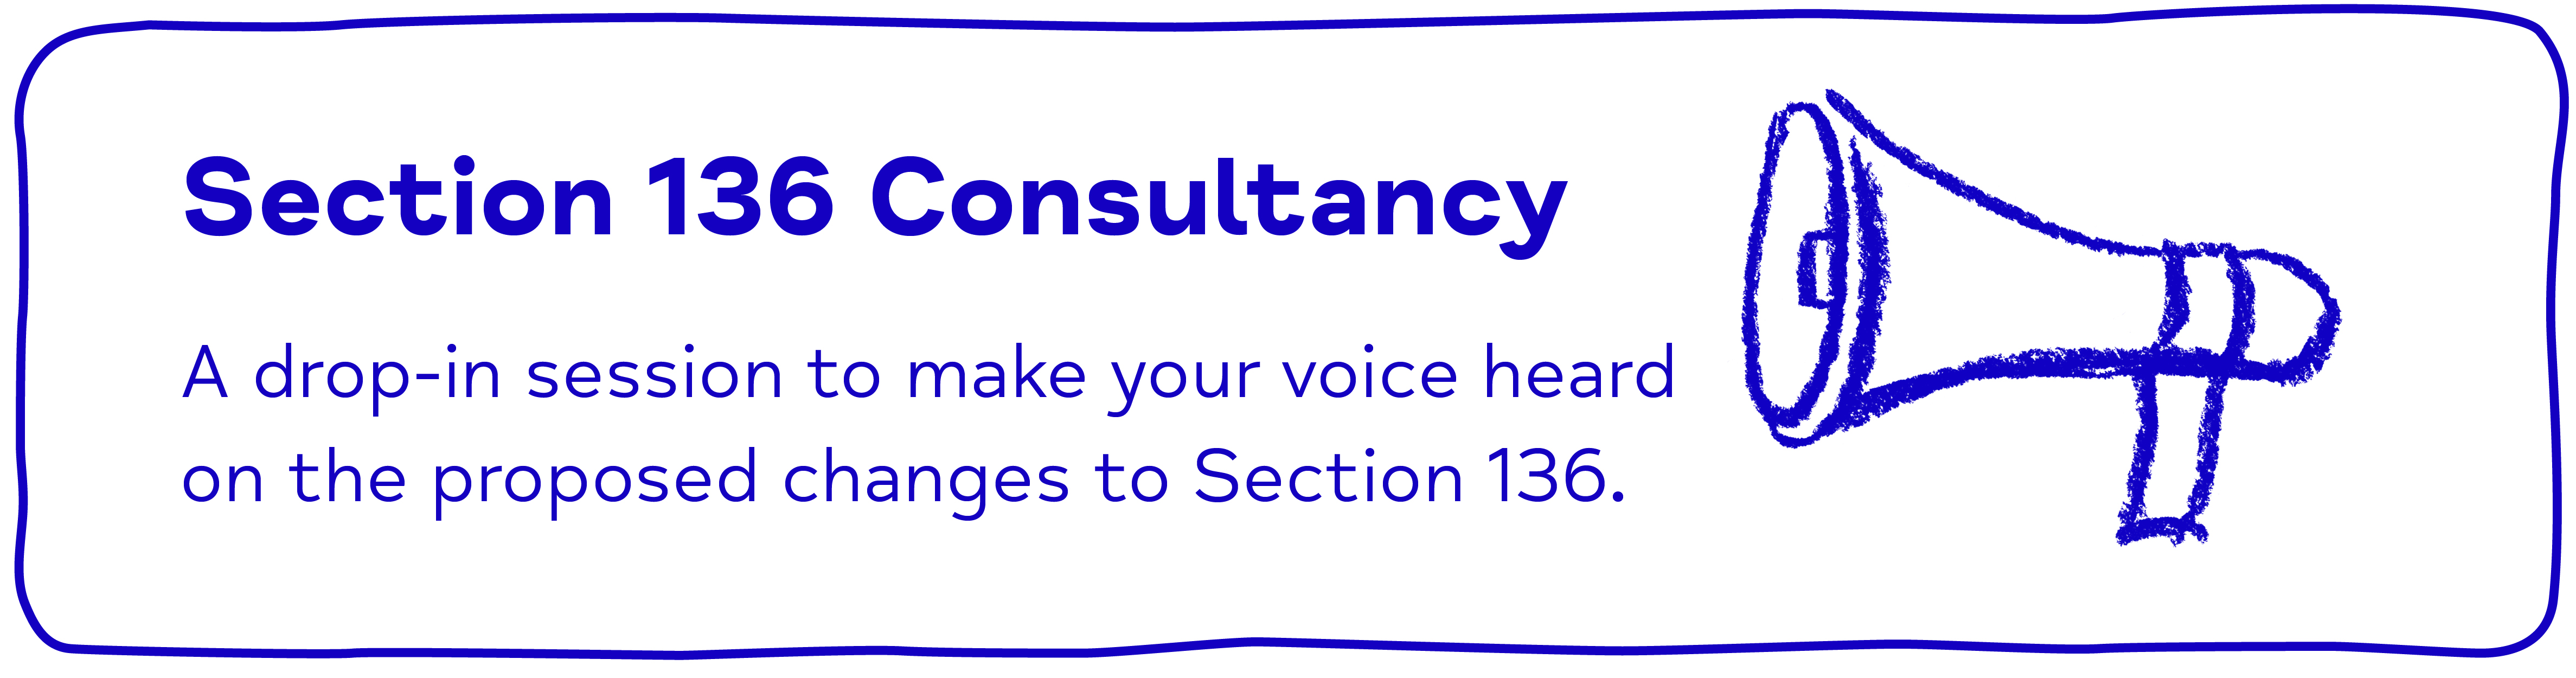 Section 136 Consultancy. A drop-in session to make your voice heard on the proposed changes to Section 136.